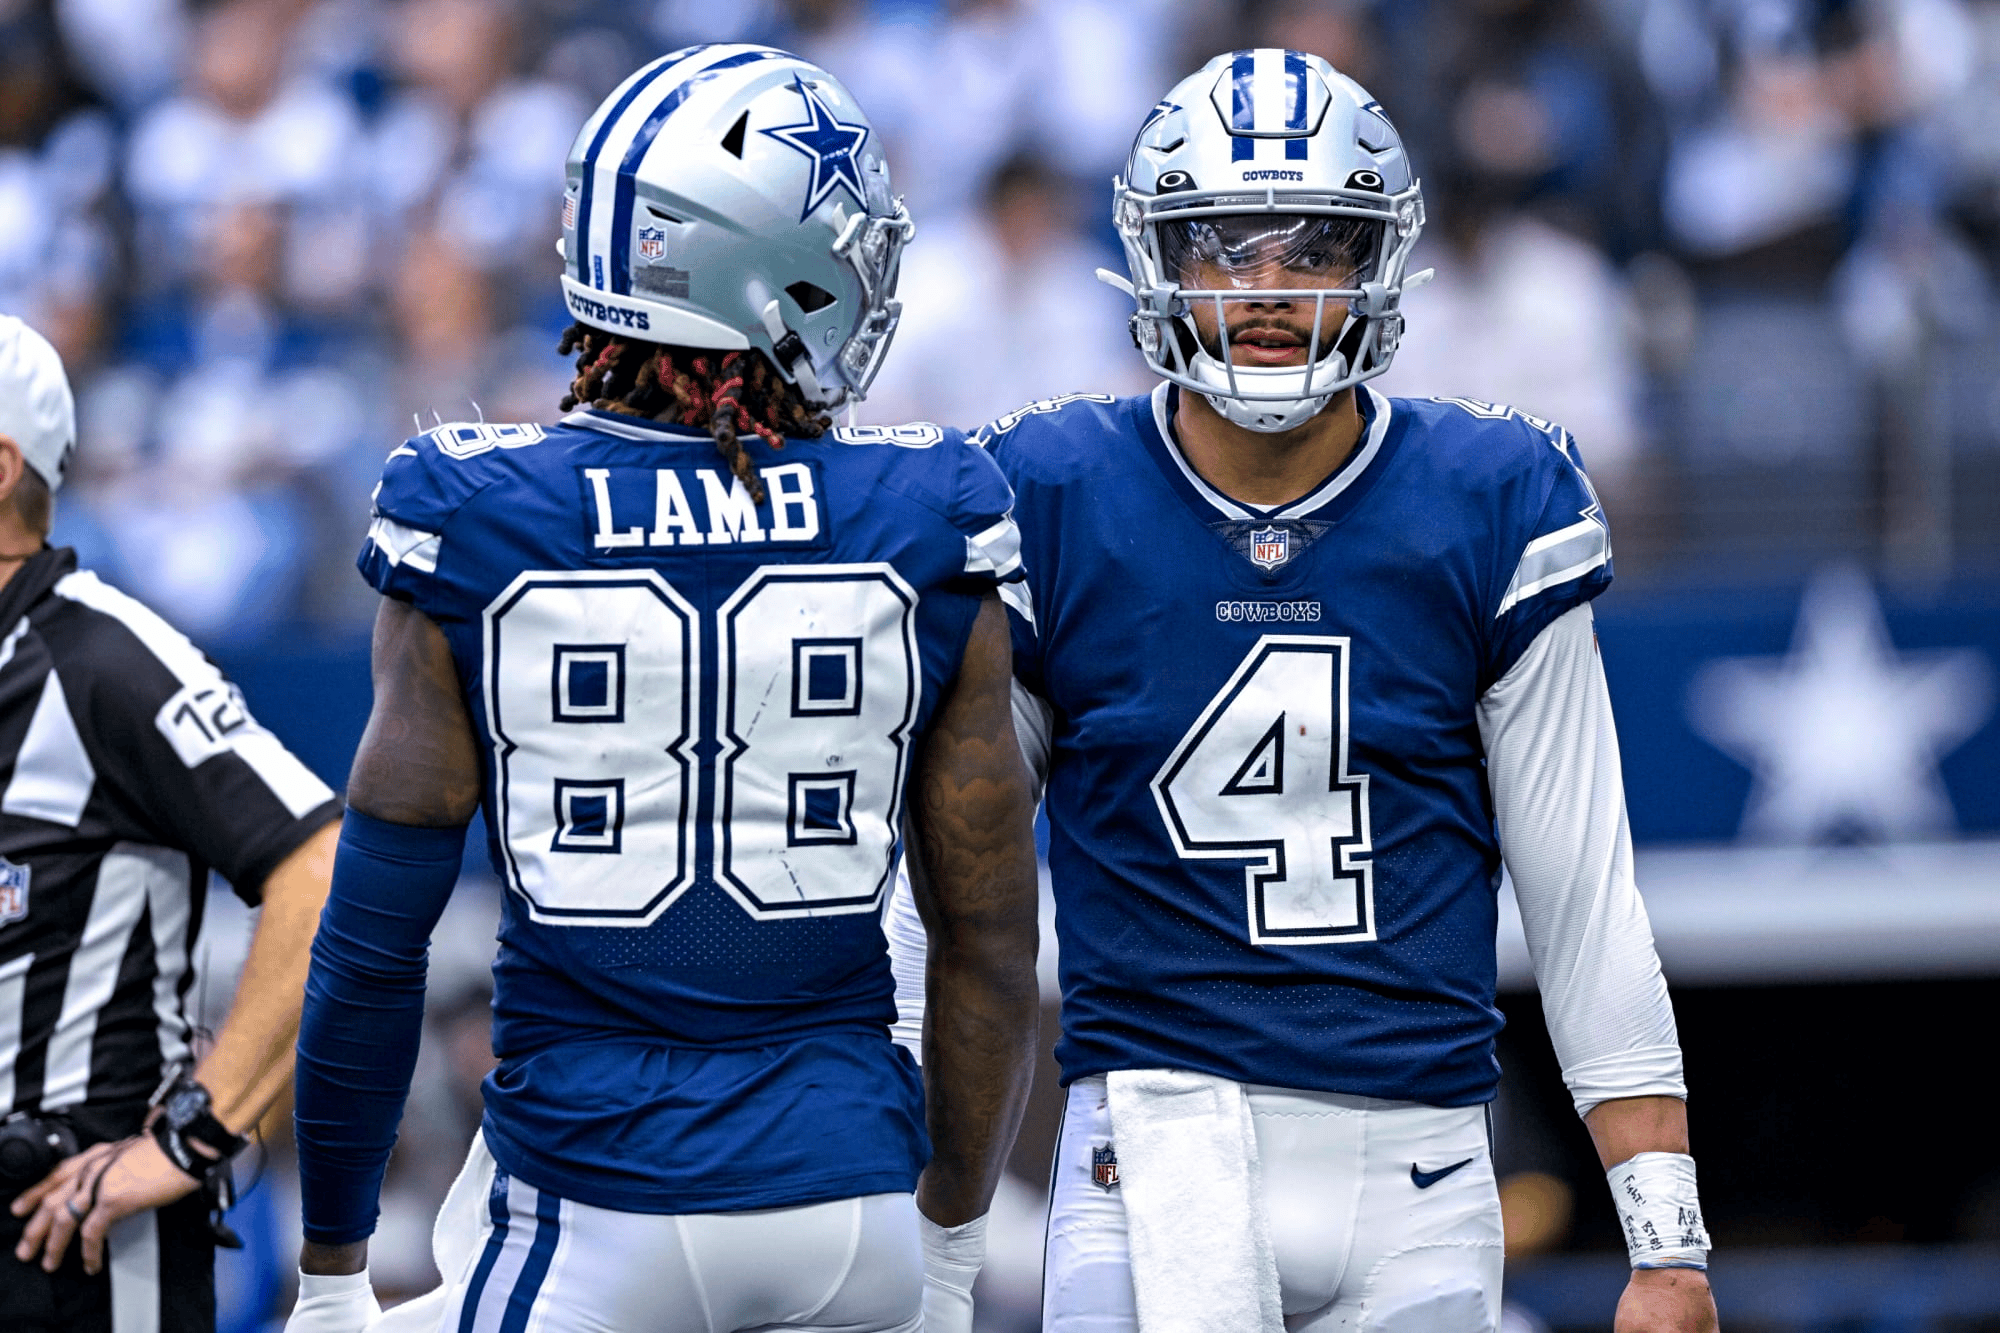 NFL: Cowboys Set Franchise History With 40-0 Win